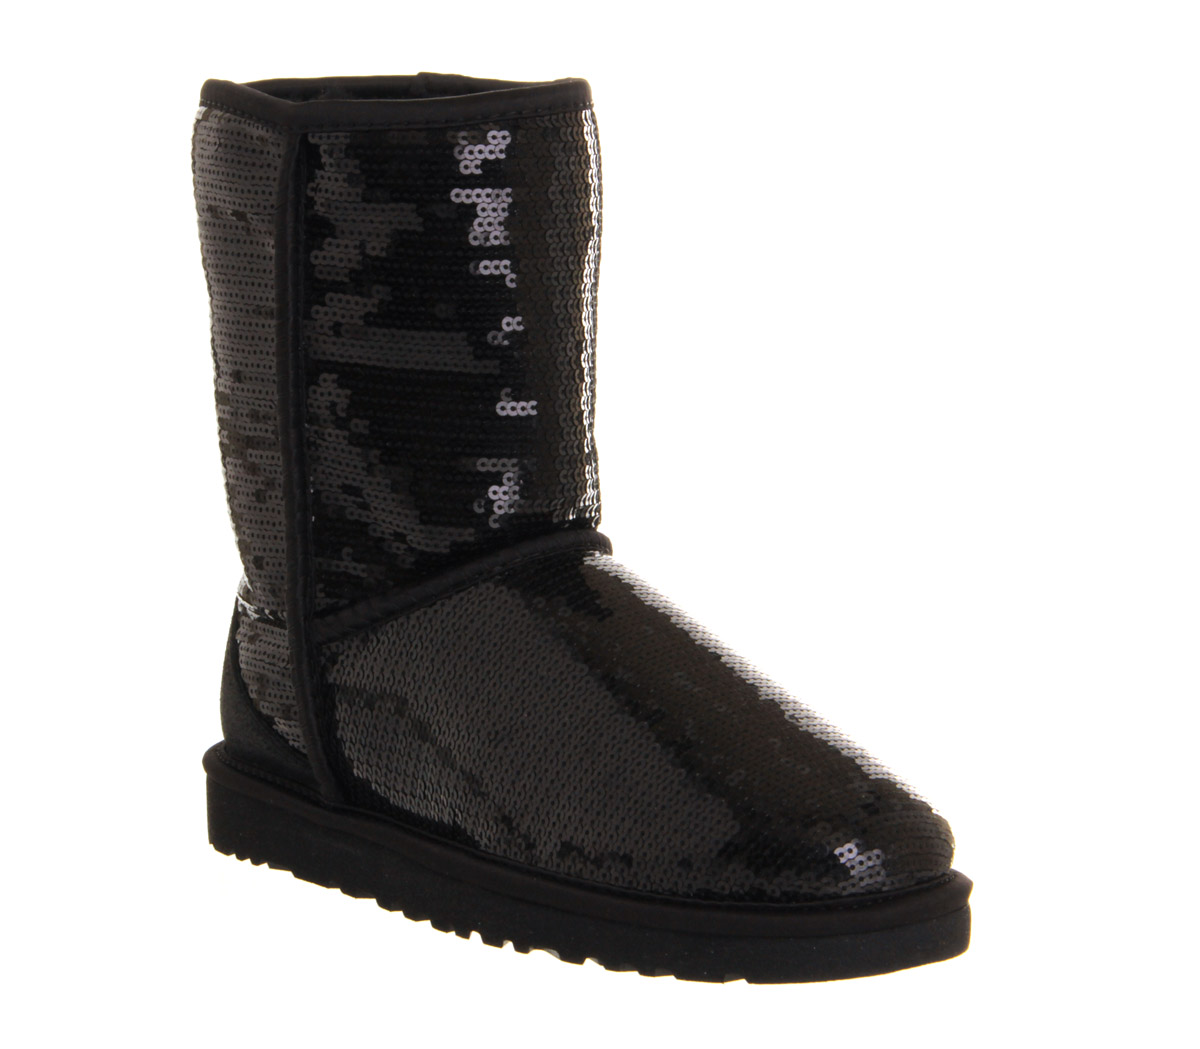 black sequin ugg boots Cheaper Than 